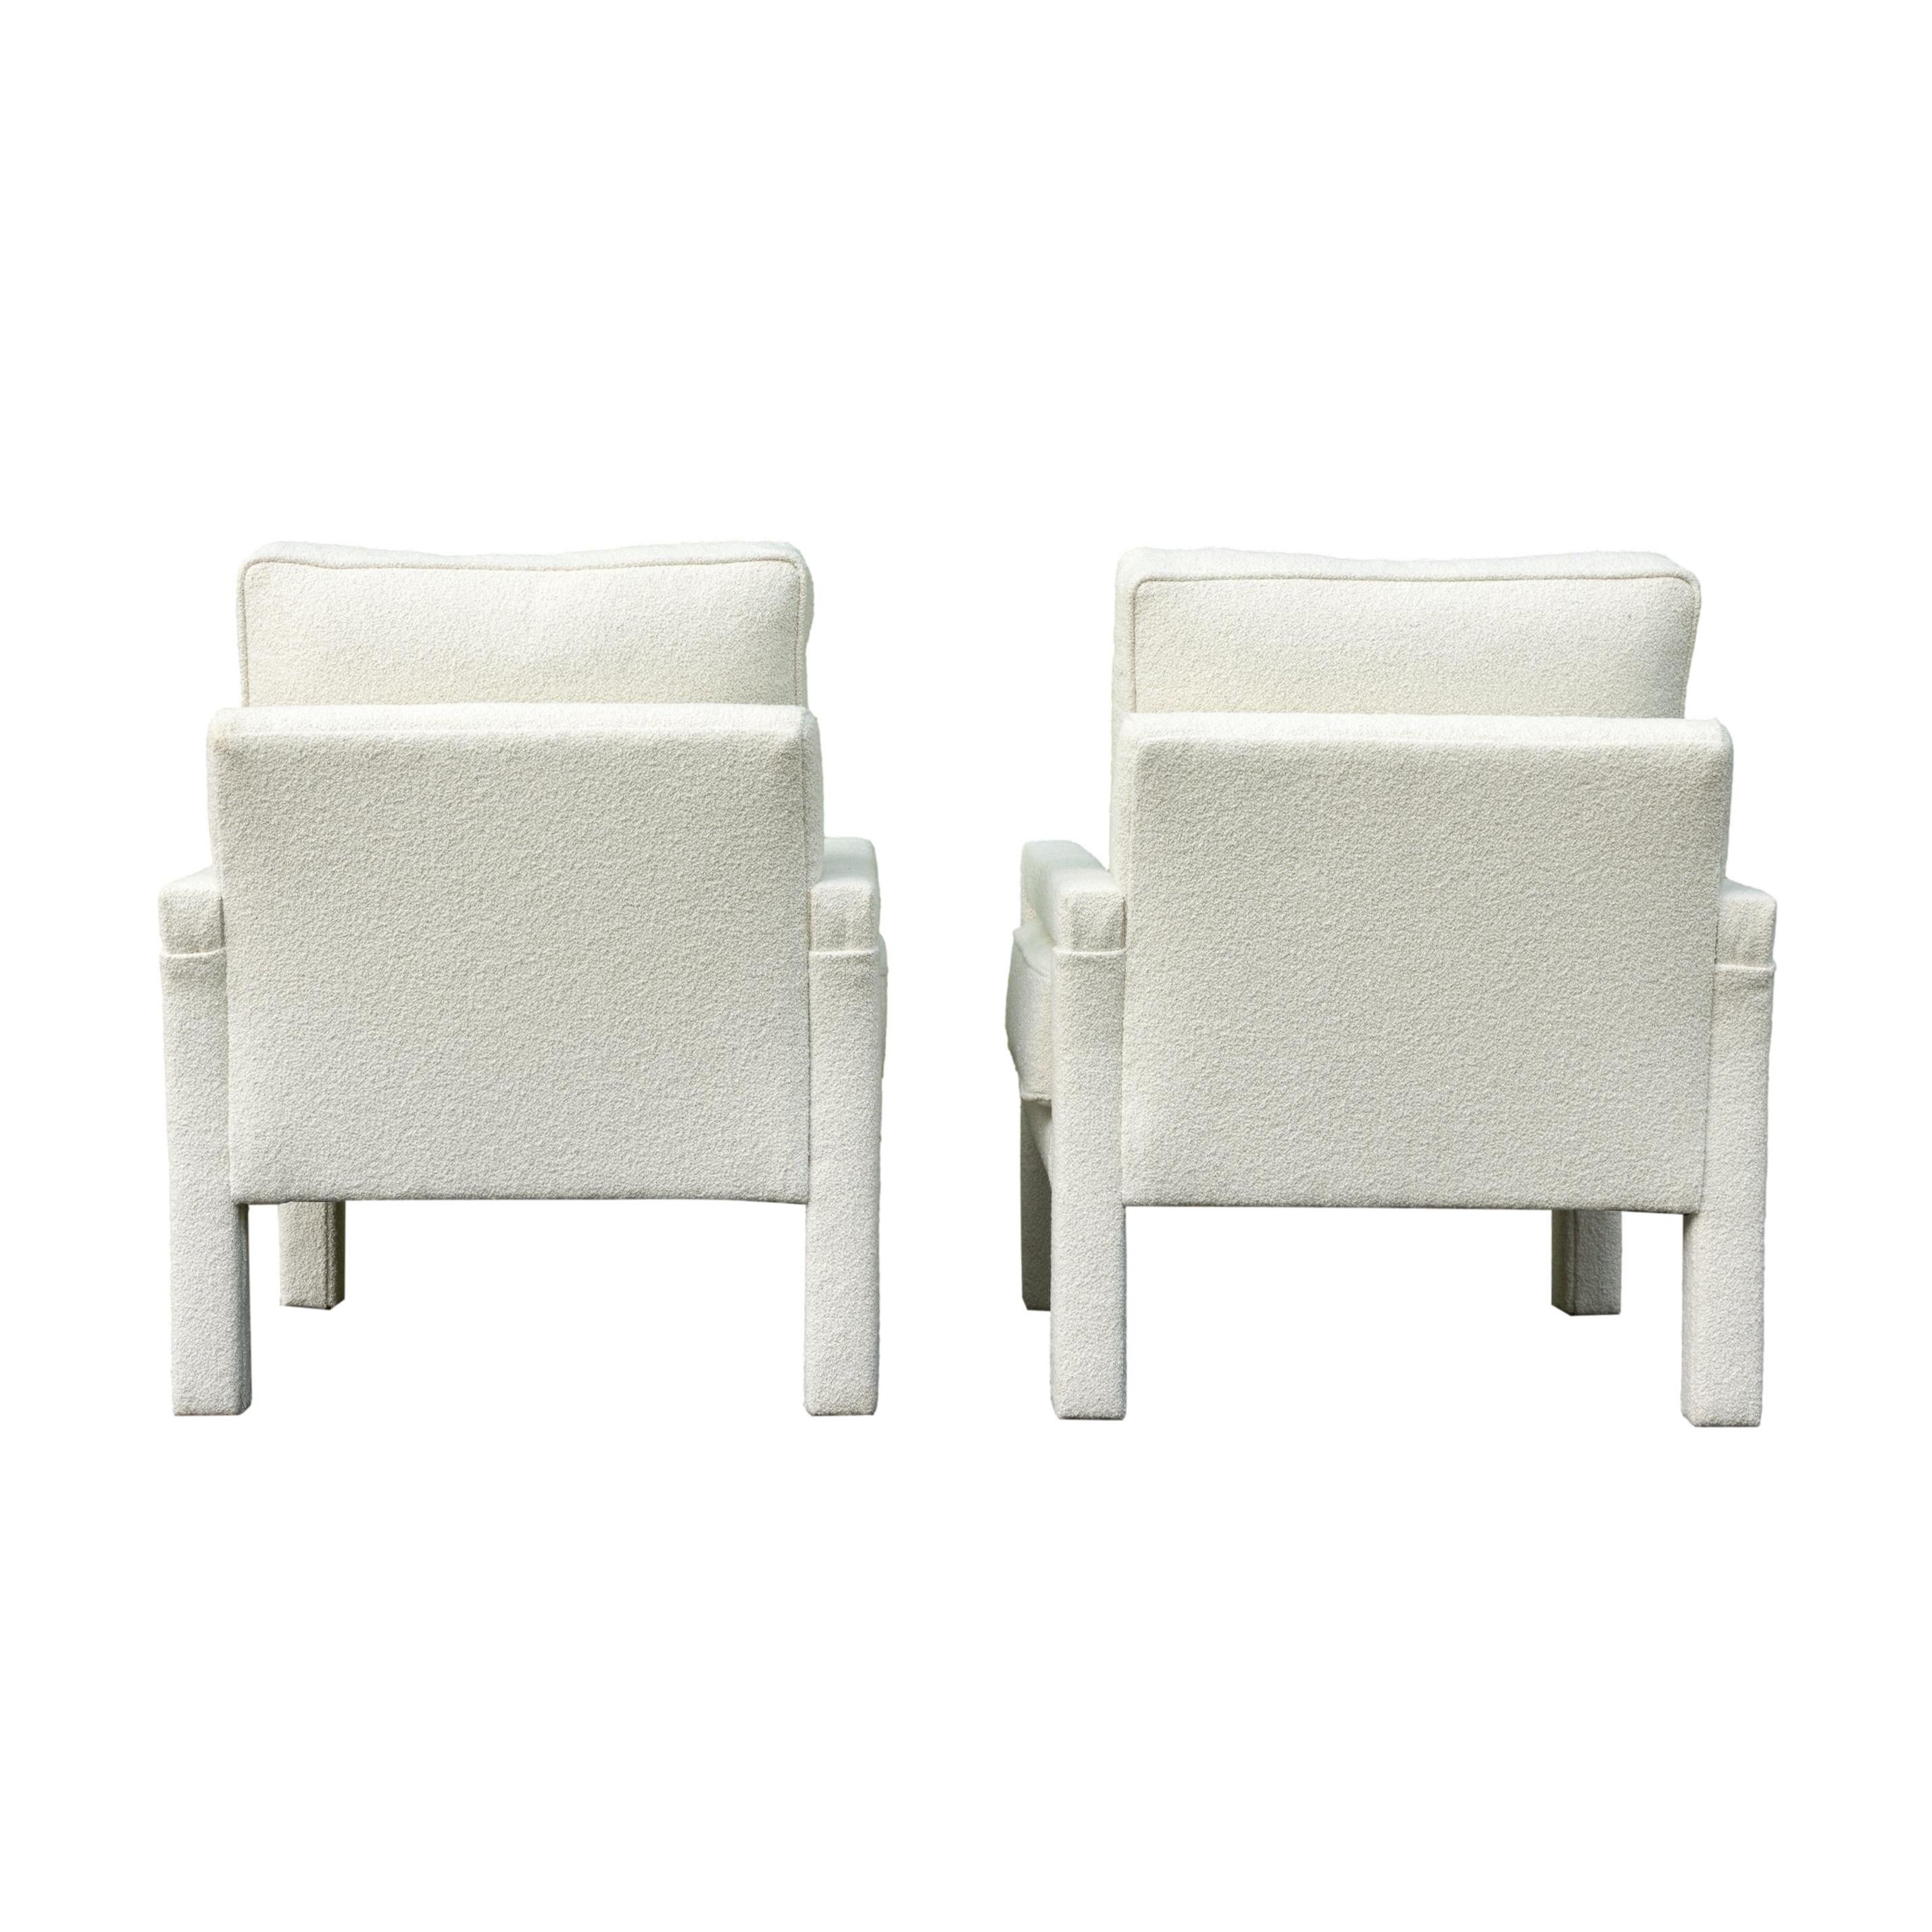 American Pair of New Milo Baughman-Style Parsons Chairs in Scalamandre Ladakh Boucle